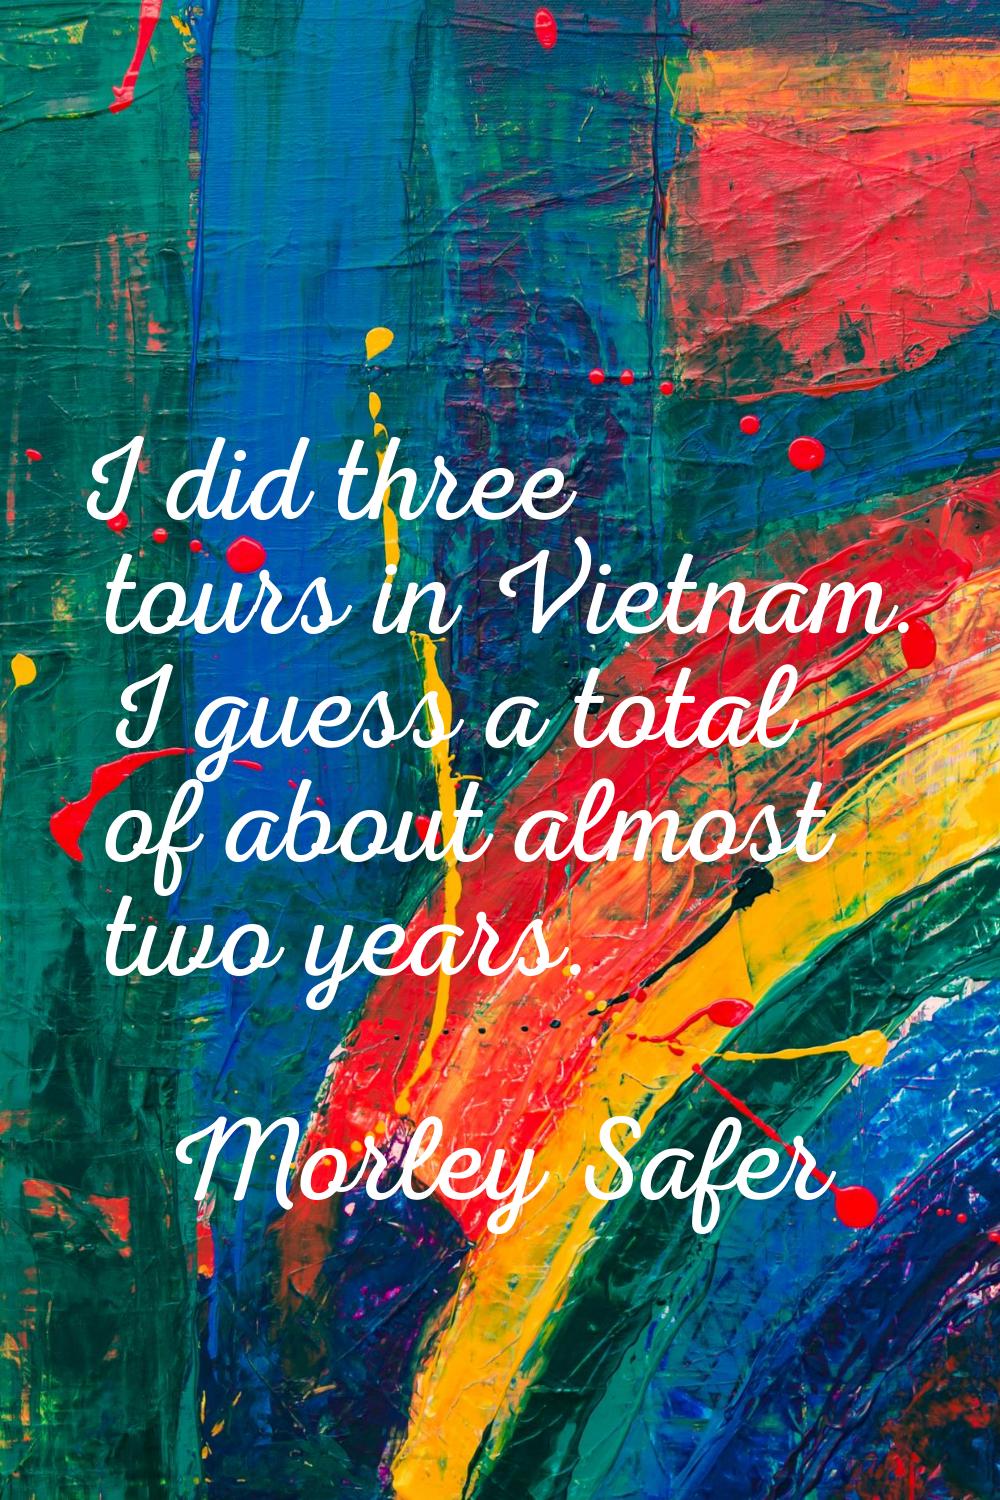 I did three tours in Vietnam. I guess a total of about almost two years.